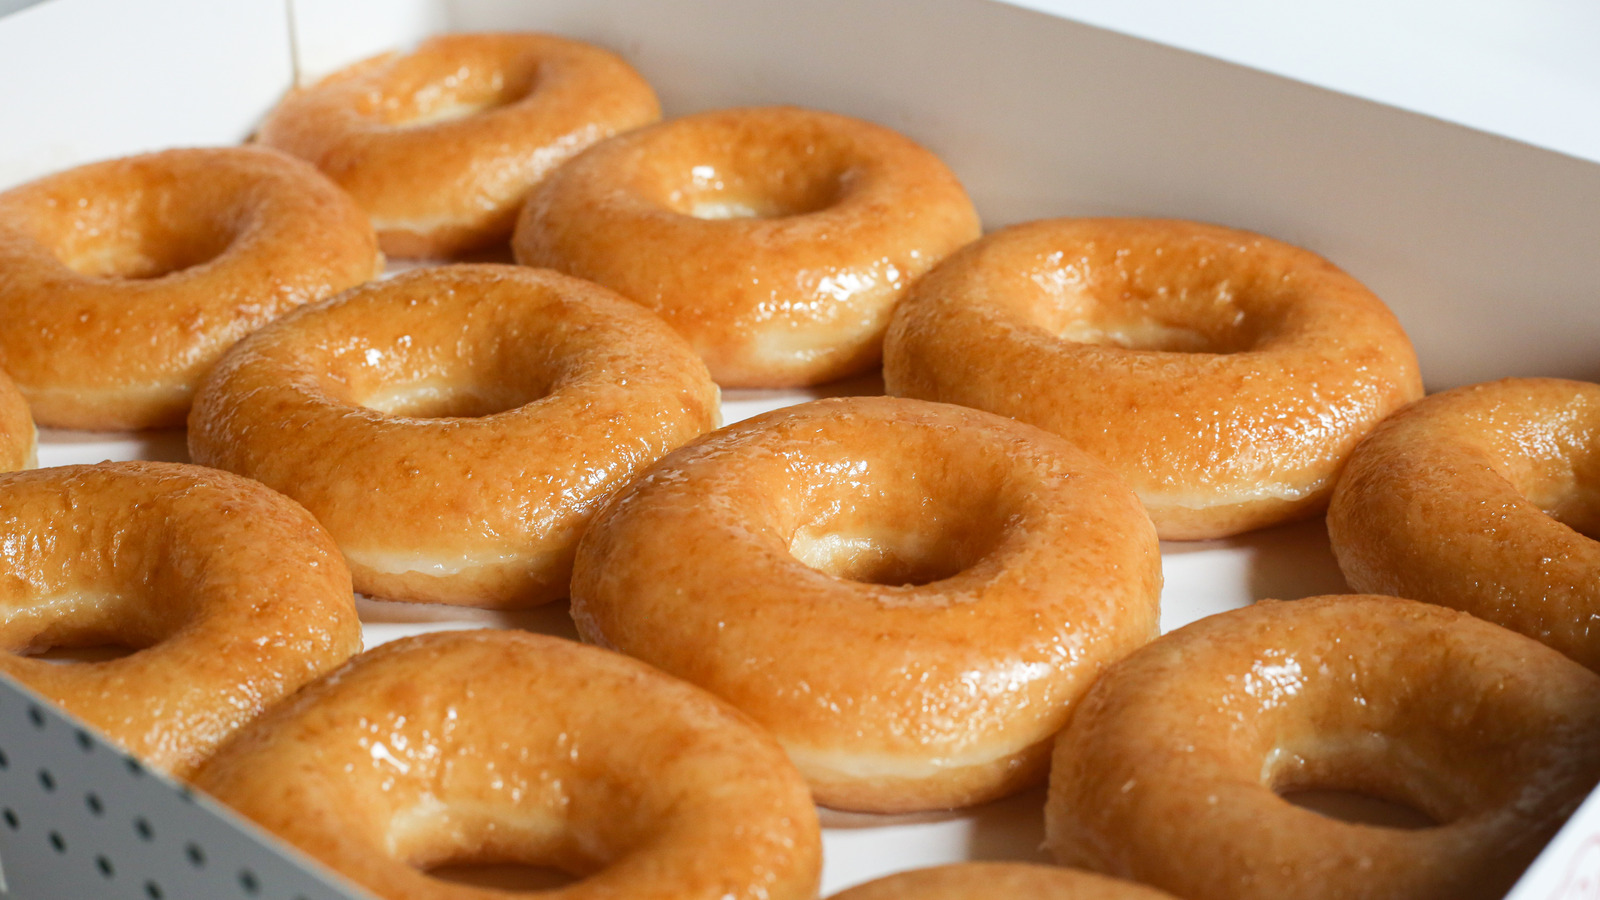 Krispy Kreme Releases 4 Donut Flavors Even The Cookie Monster Would Love